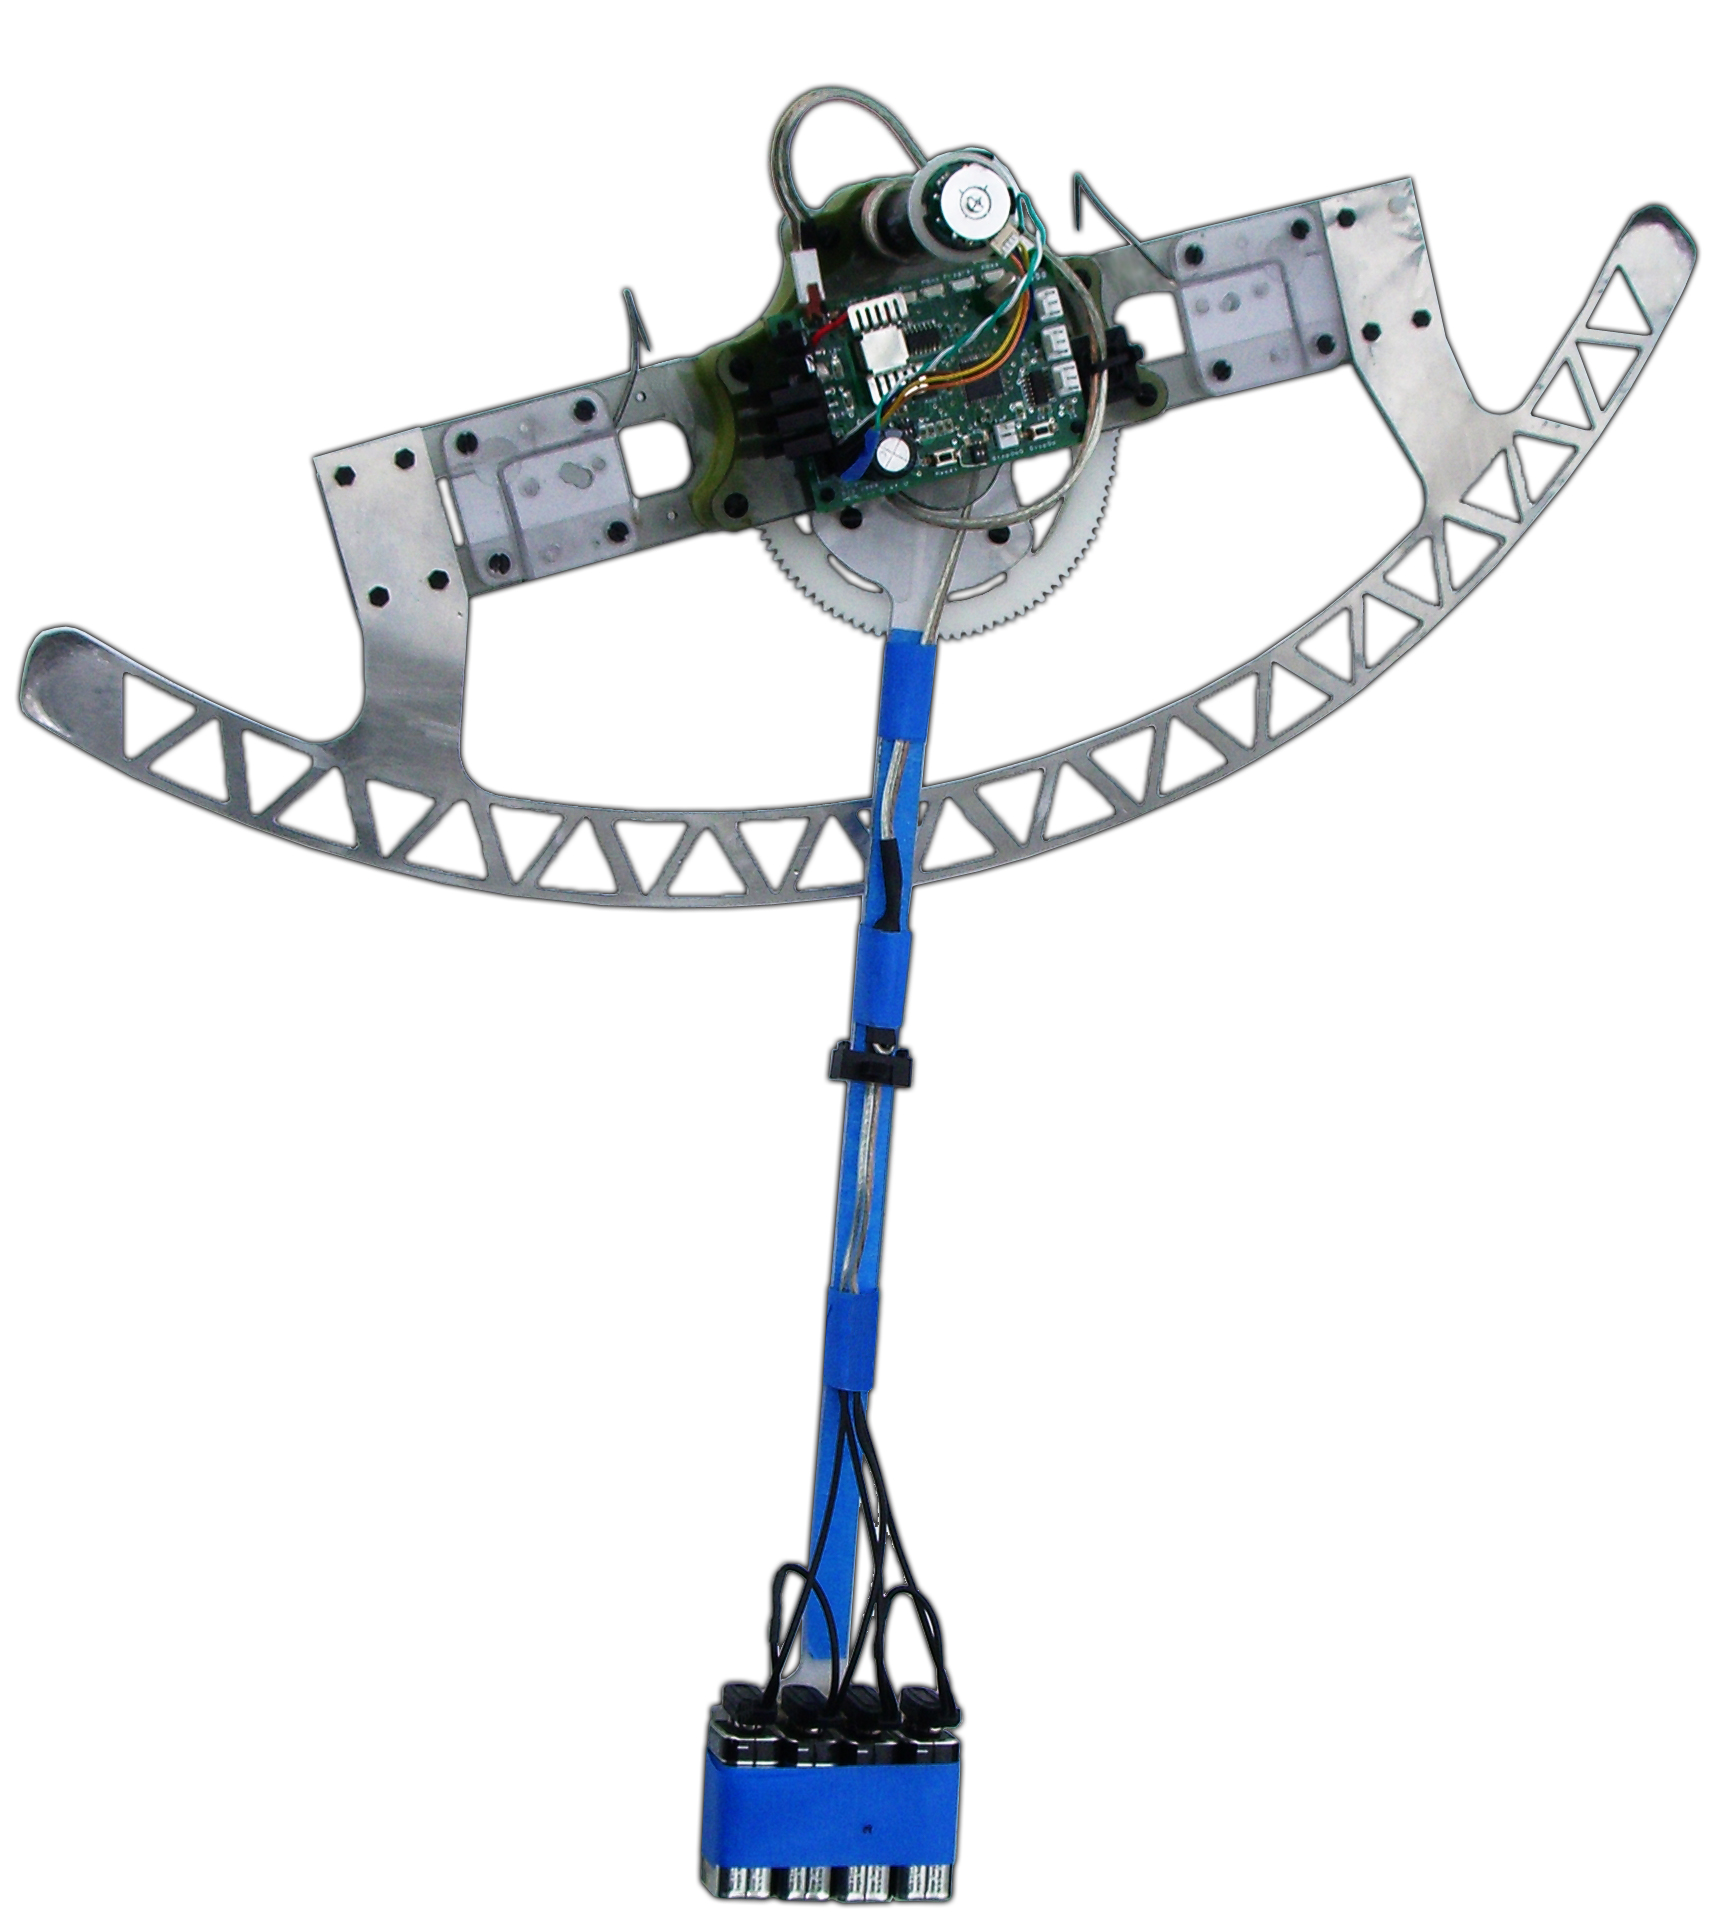 The ROCR Oscillating Climbing Robot developed by University of Utah mechanical engineer William Provancher and colleagues can climb carpeted walls efficiently using two hook-like claws, a motor and a tail that swings like a grandfather clock's pendulum. Weighing only 1.2 pounds and measuring 12.2 inches wide by 18 inches long, it has potential uses for surveillance, inspection, maintenance, teaching engineering and even as a toy.